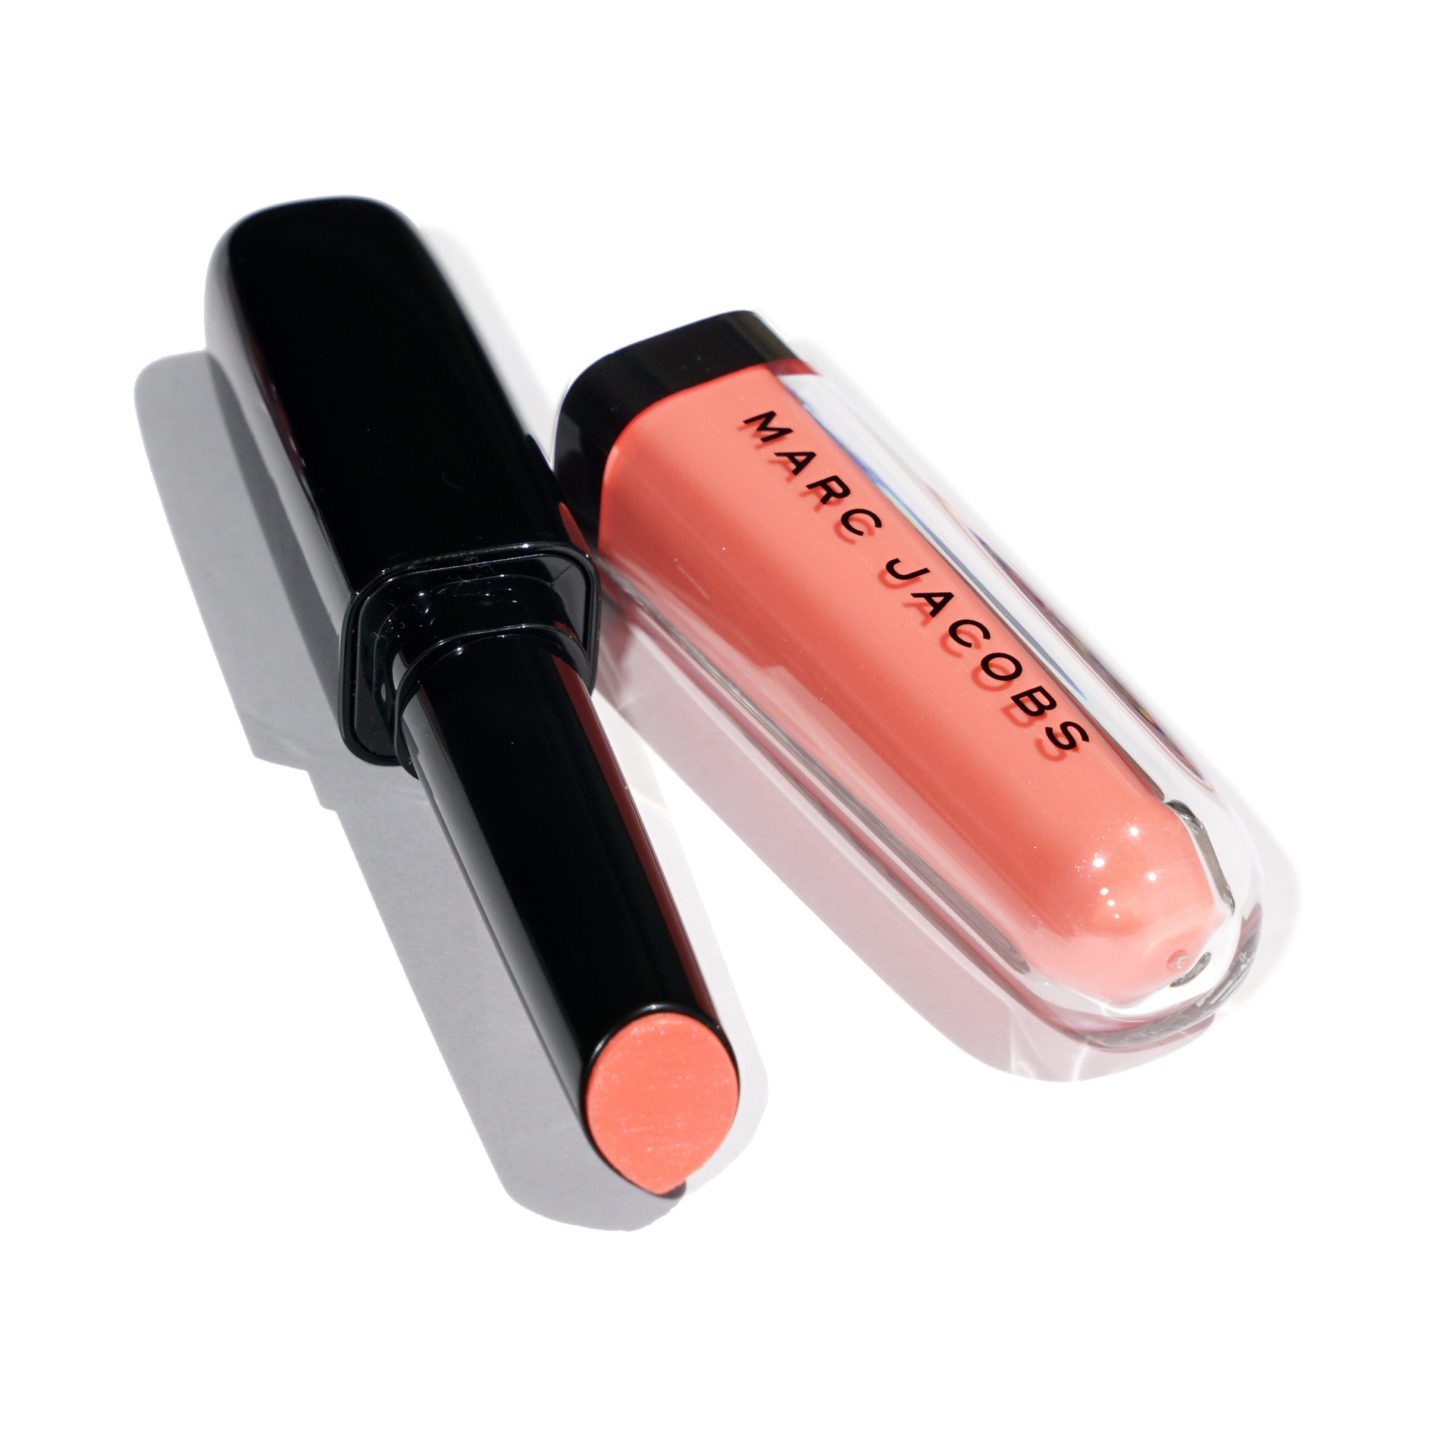 Marc Jacobs Beauty Enamored Hydrating Lip Gloss Stick review P(r)each | The Beauty Look Book